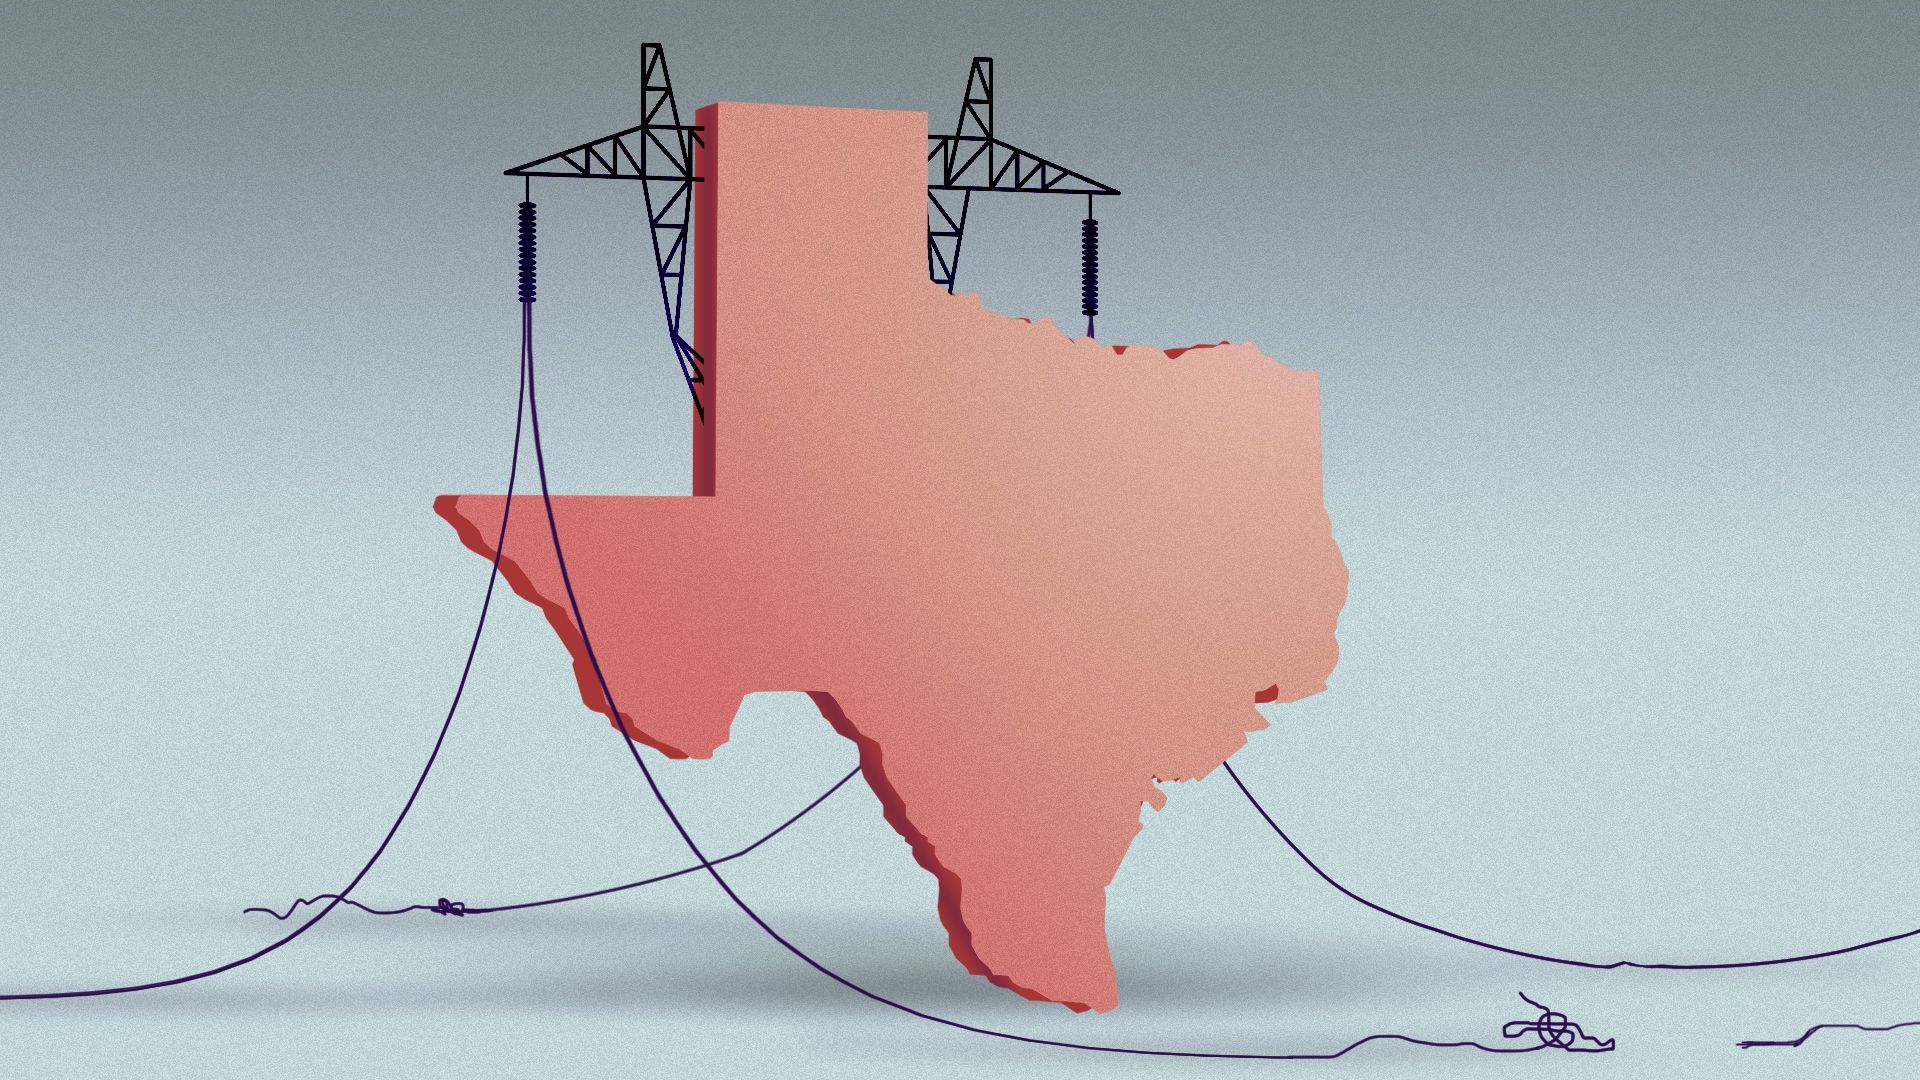 Illustration of the state of Texas combined with an electricity pylon whose power lines are damaged and fallen